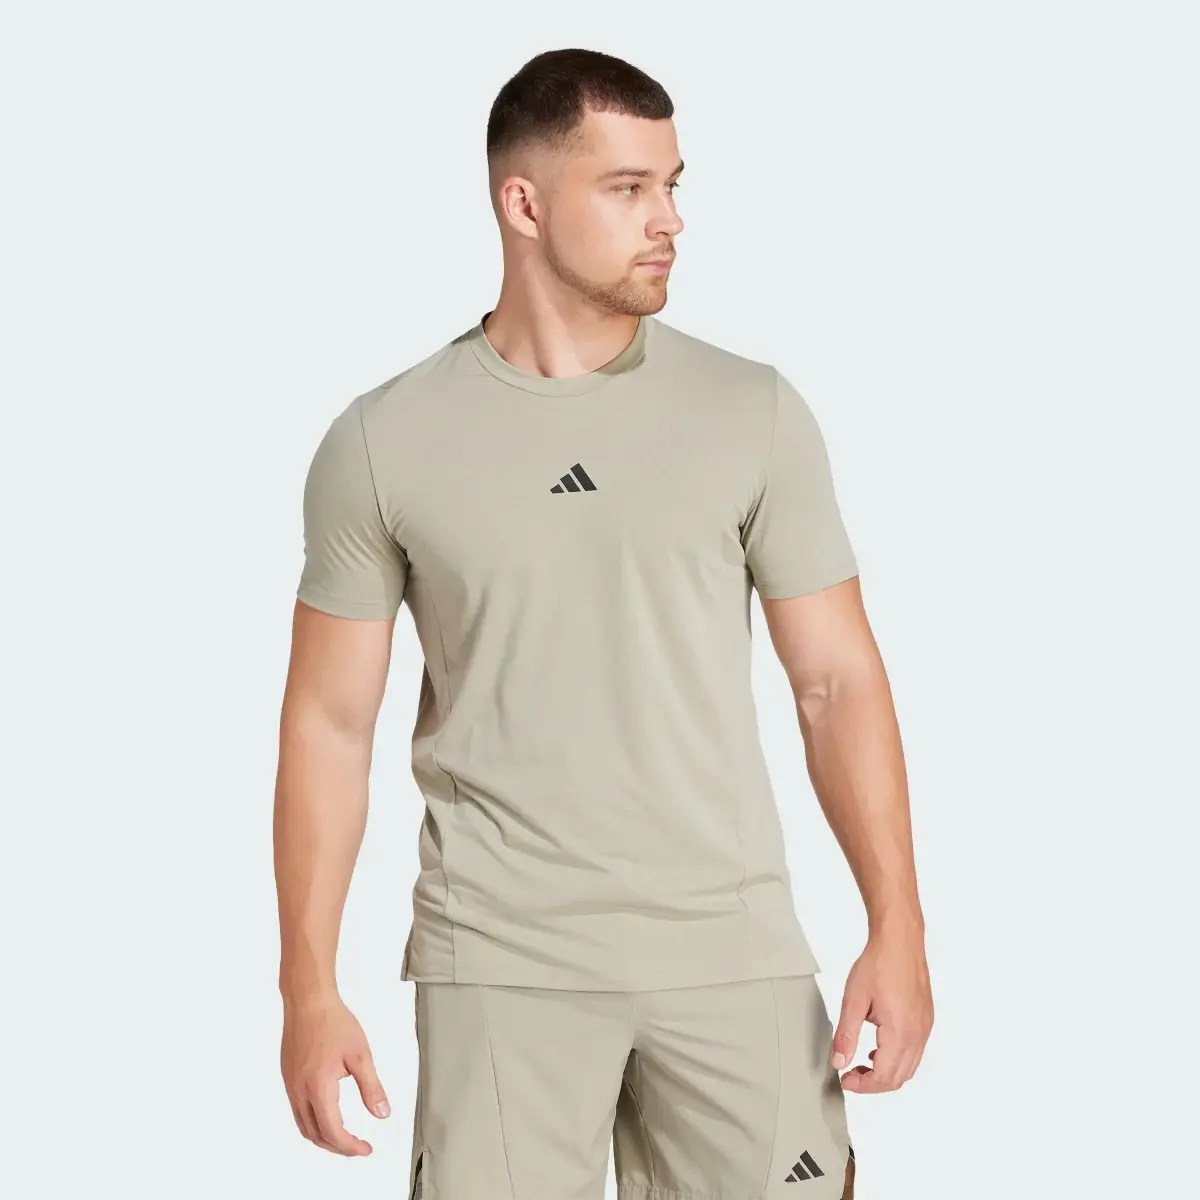 Adidas Designed for Training Workout Tee. 2